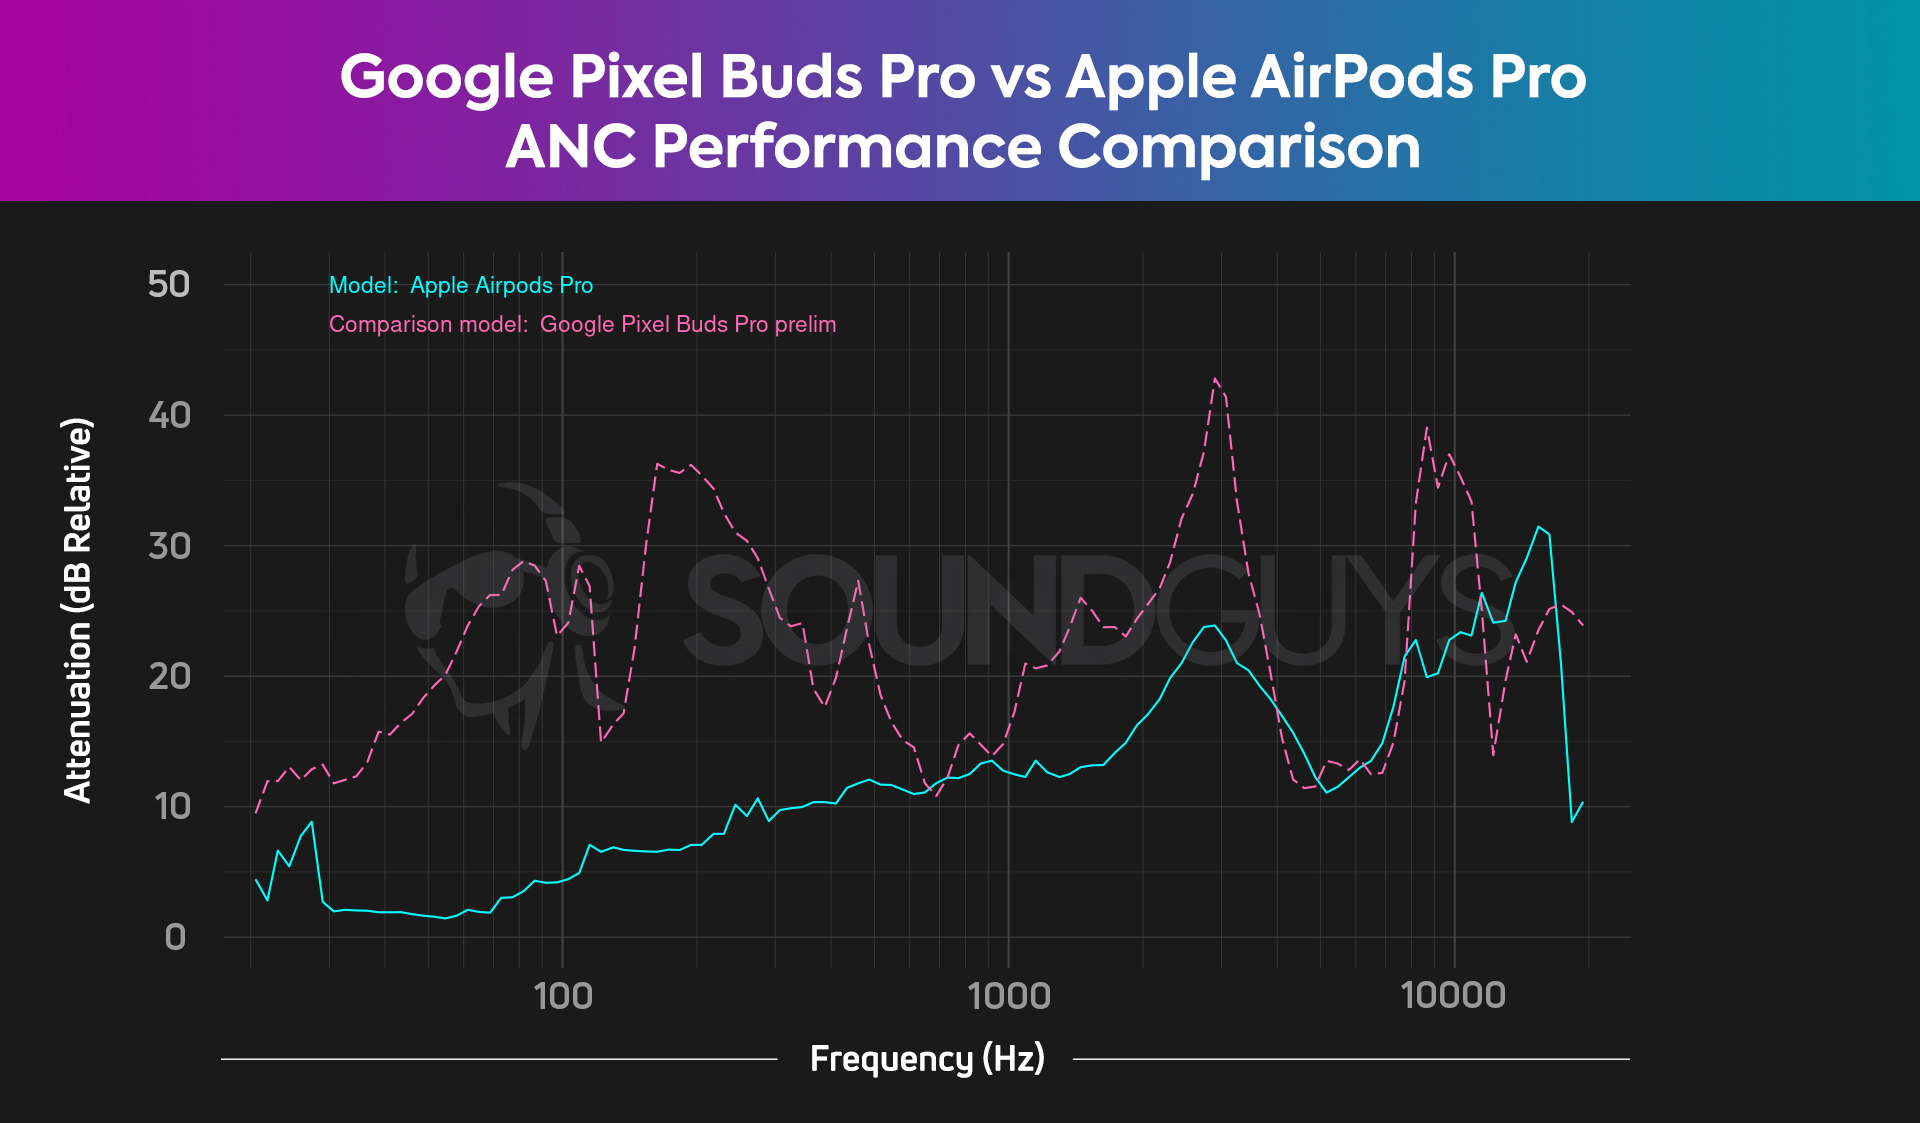 A chart compares the Apple AirPods Pro and Google Pixel Buds Pro's total attenuation, showing the Google Pixel Buds Pro's ANC is much better than Apple's.